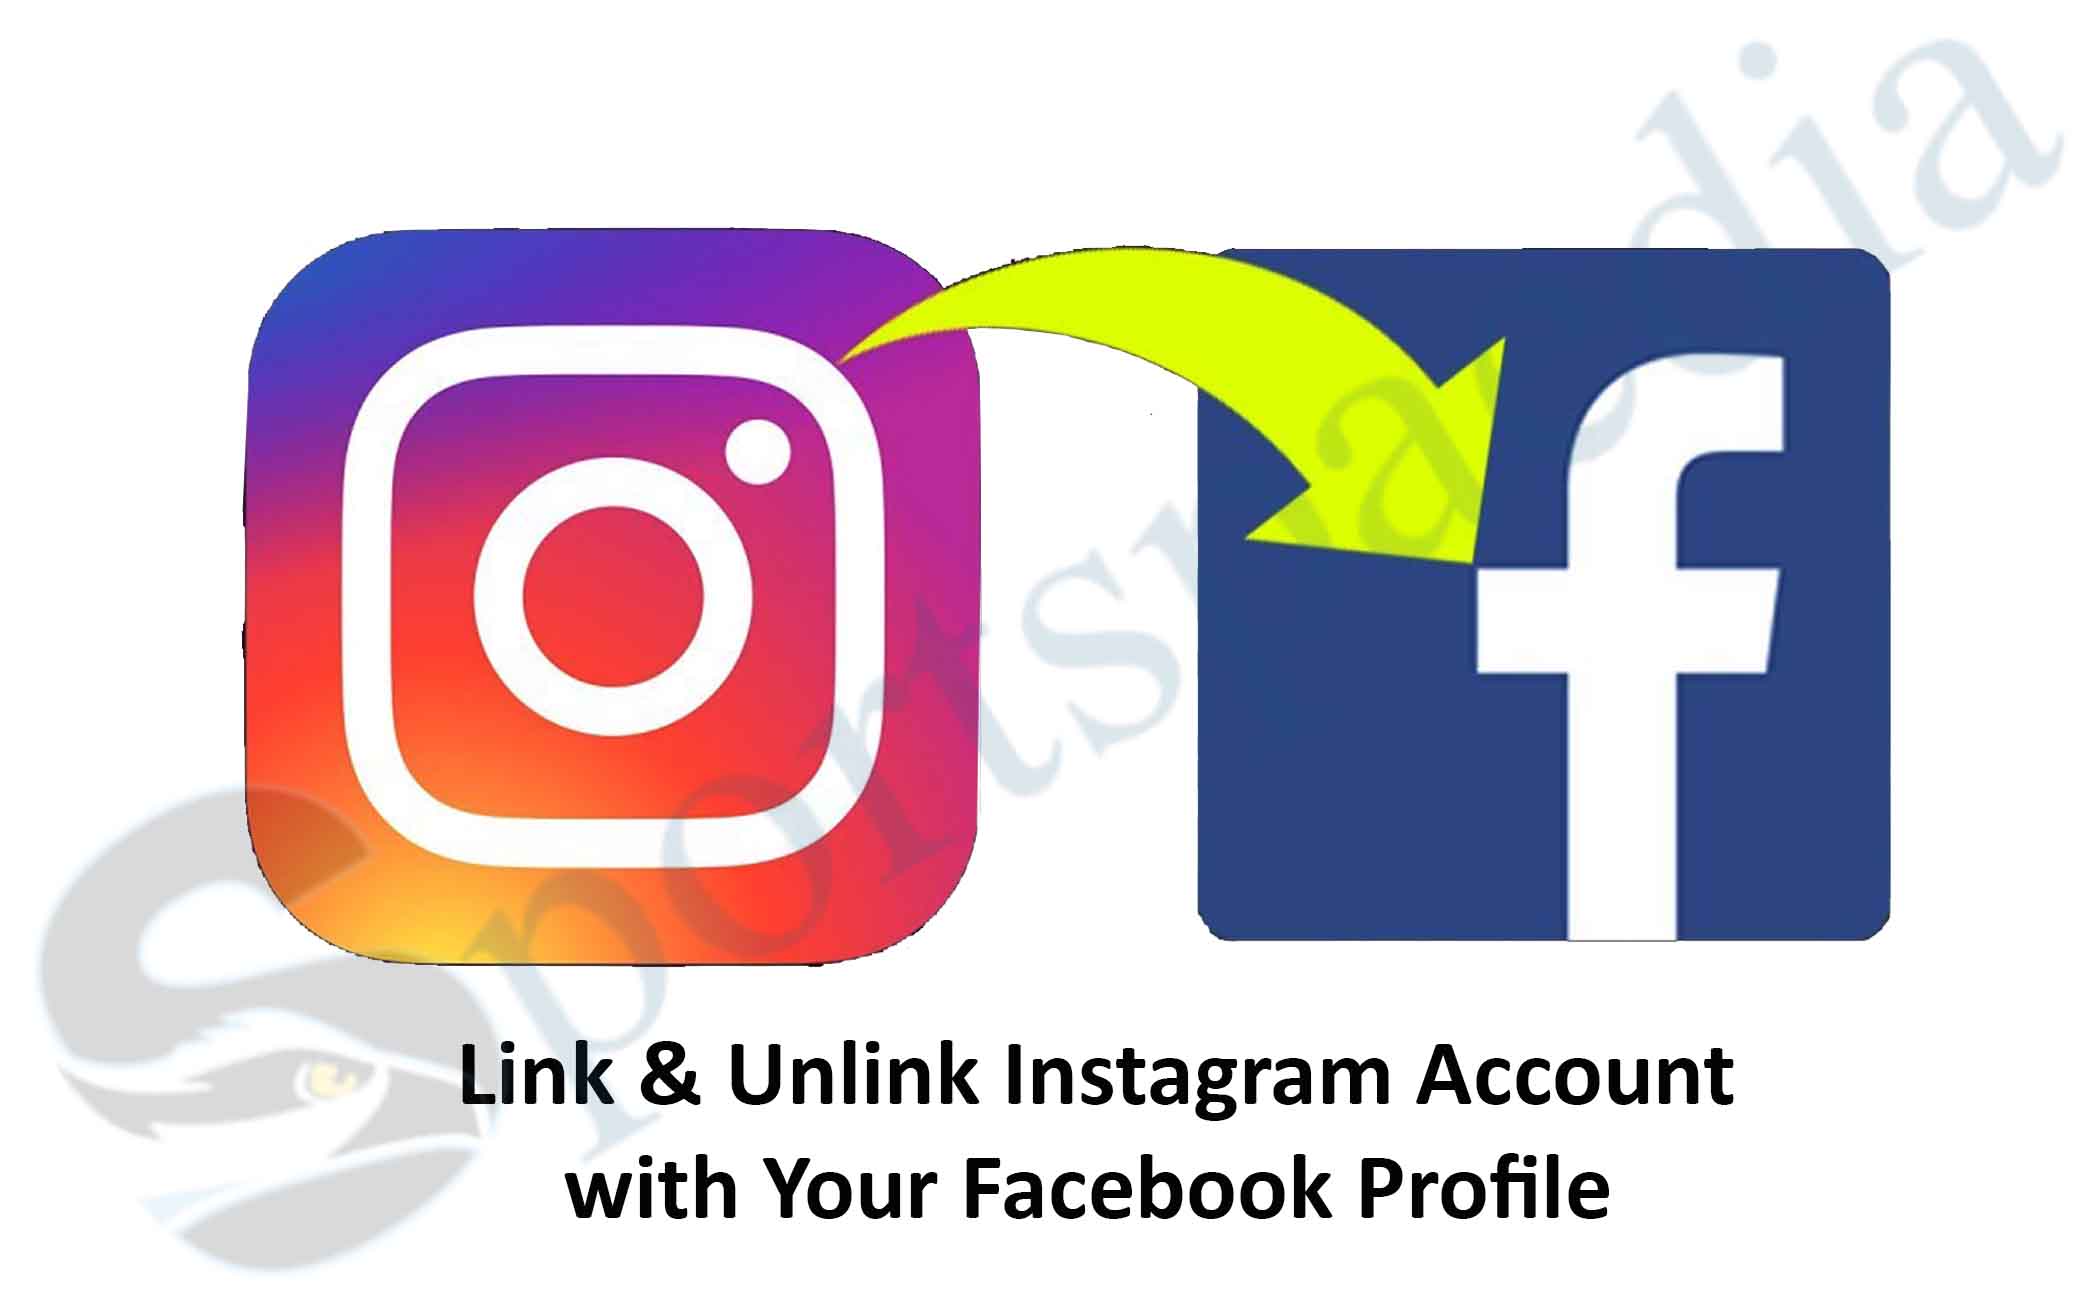 How to Link & Unlink Instagram Account with Your Facebook Profile